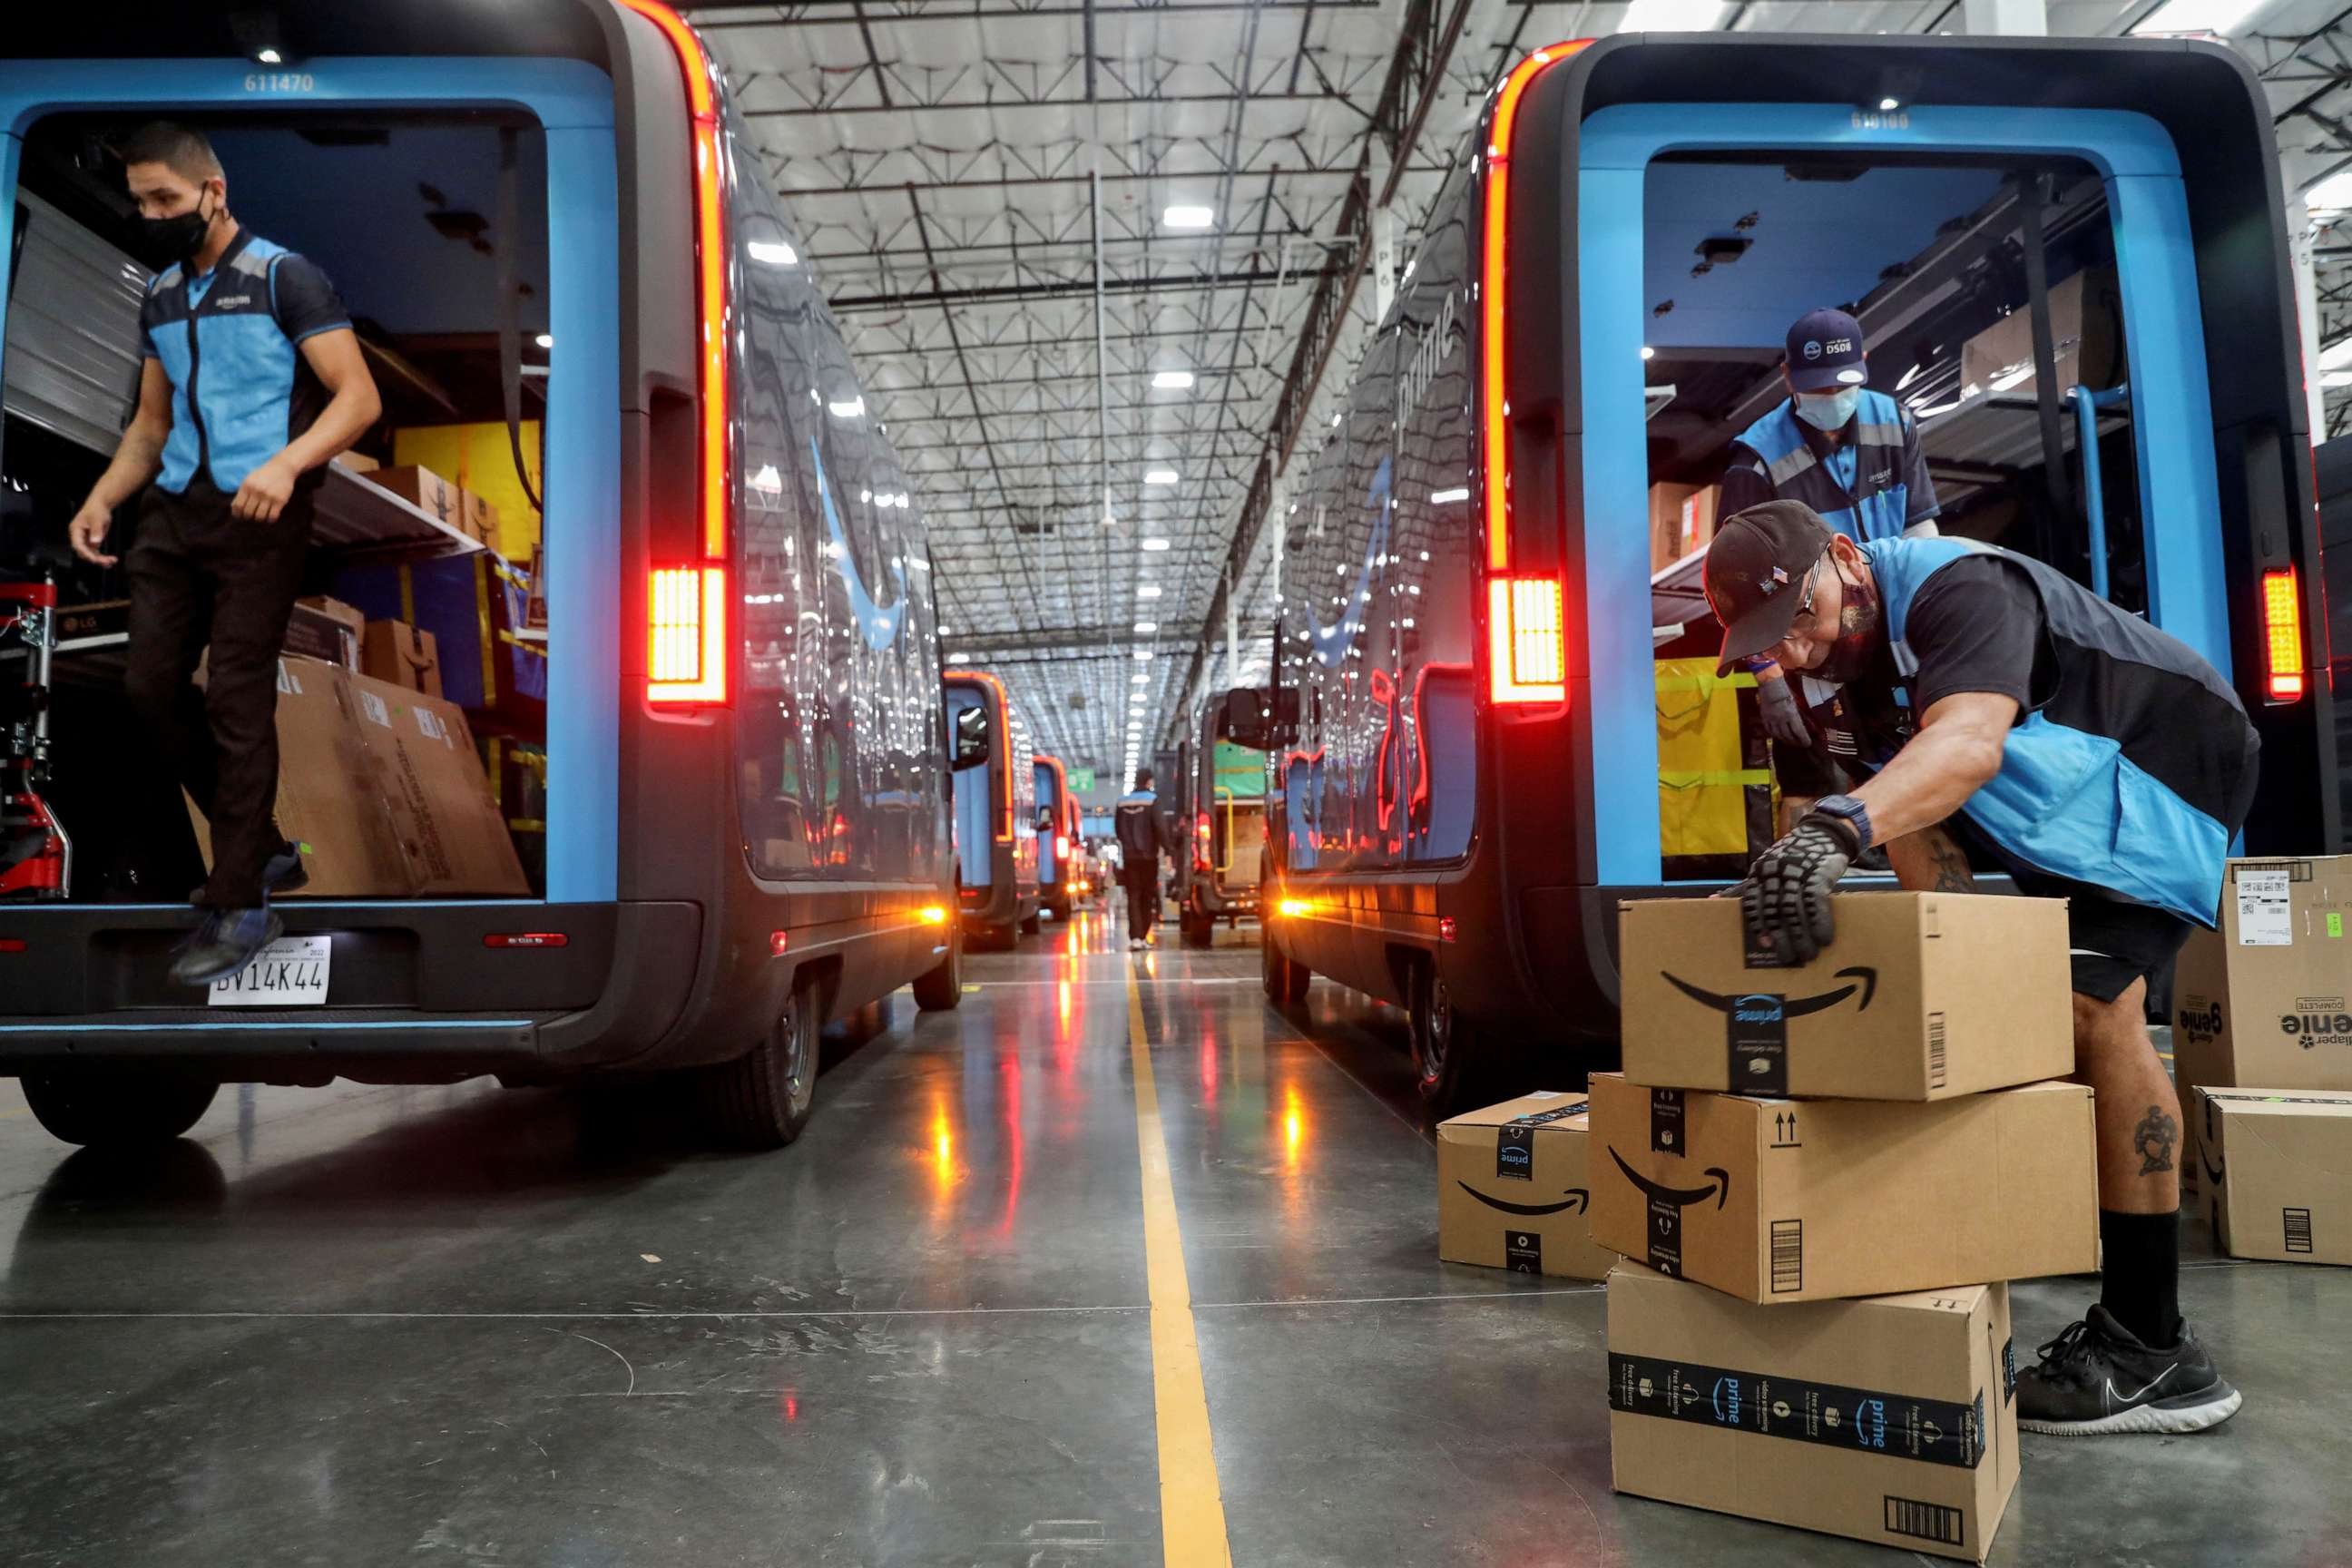 PHOTO: Workers load packages into Amazon Rivian electric trucks at an Amazon facility in Poway, California, U.S., November 16, 2022.